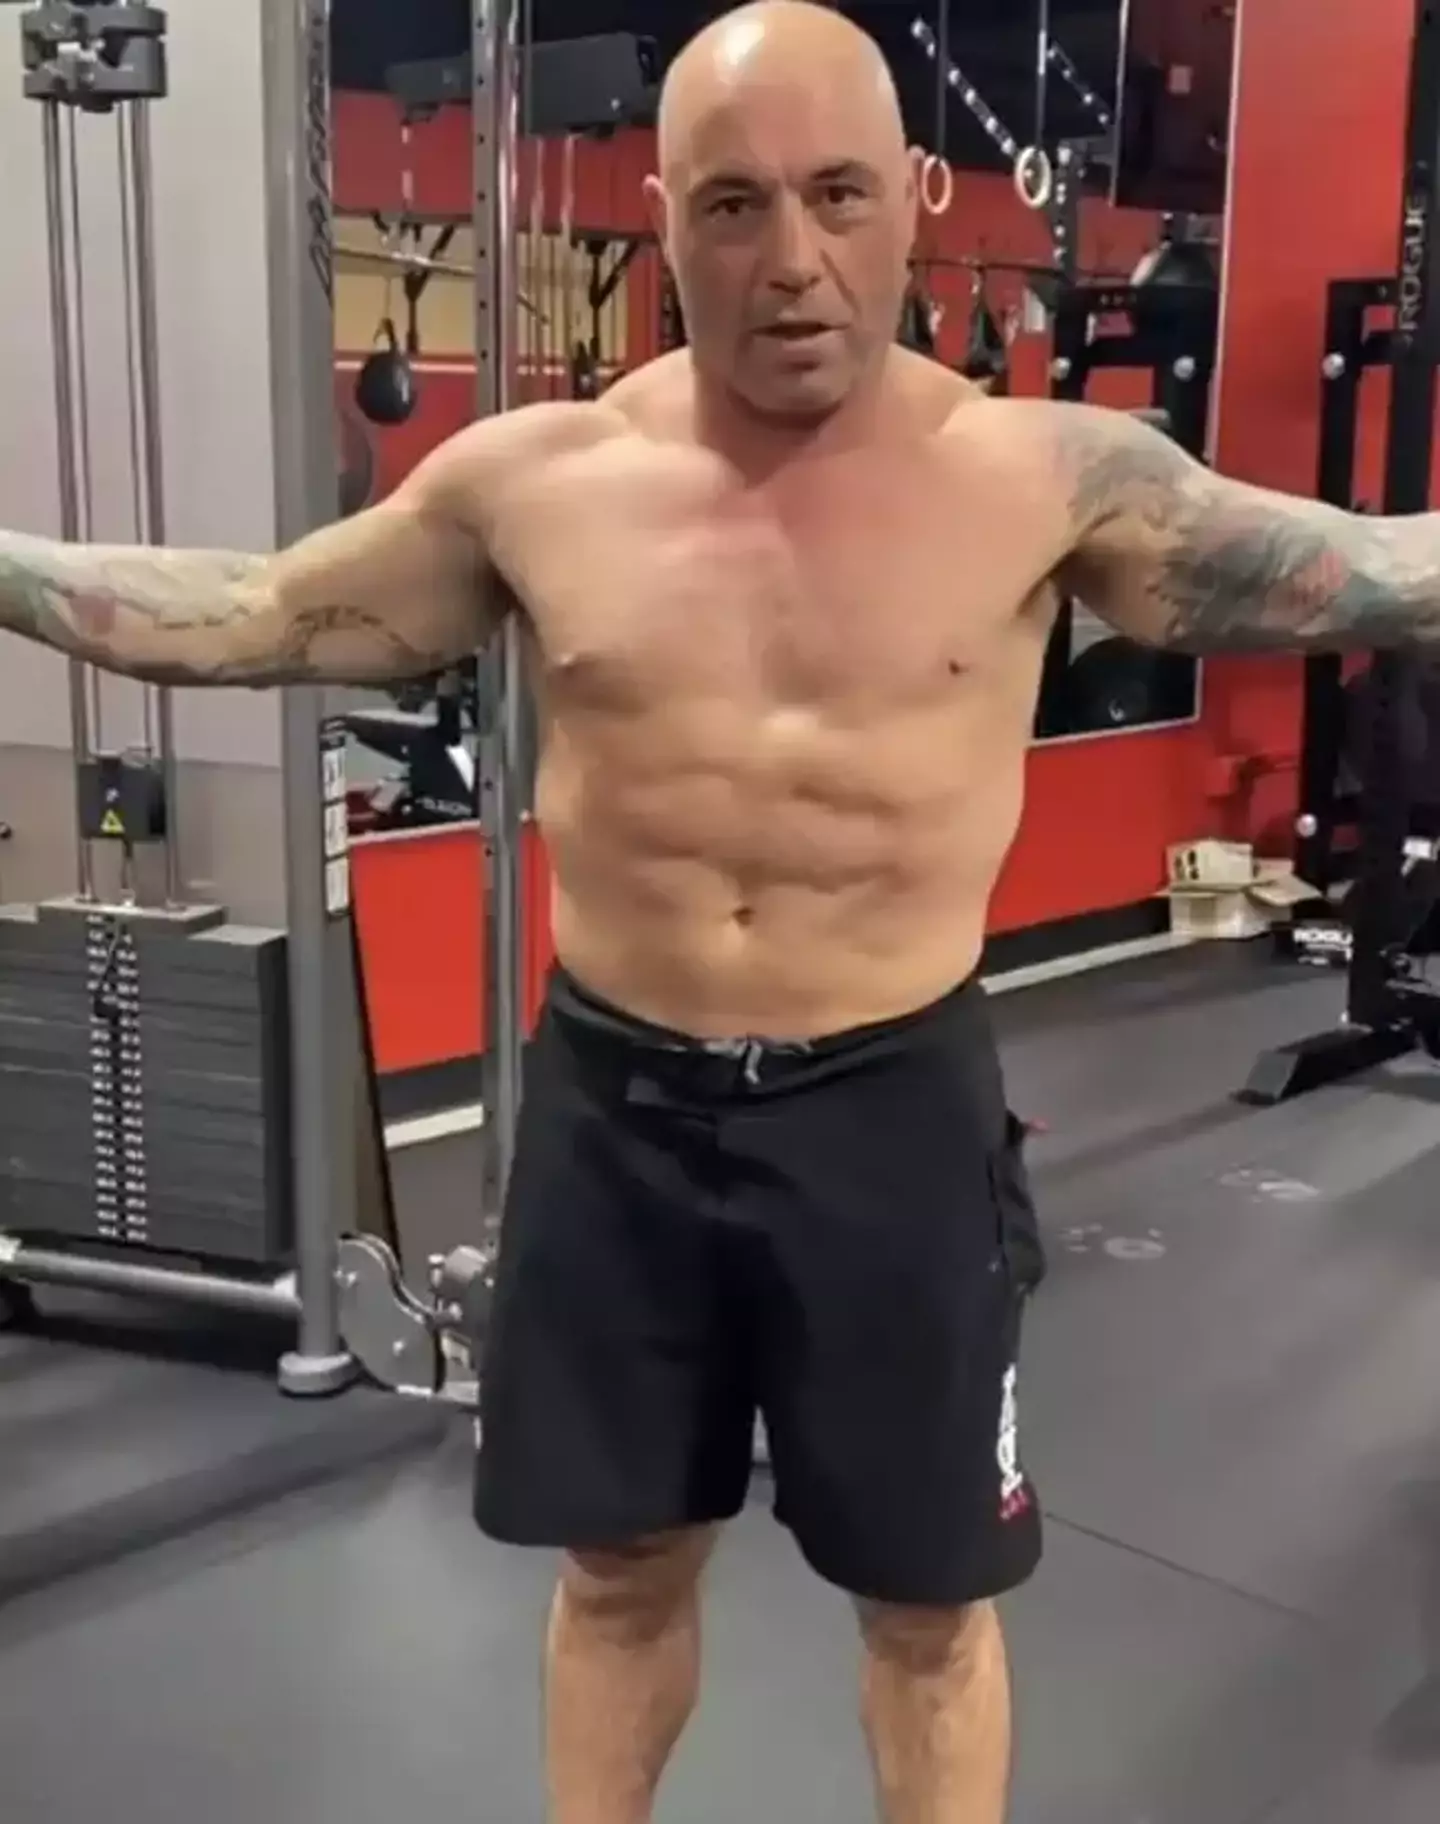 Rogan lost a ton of weight.